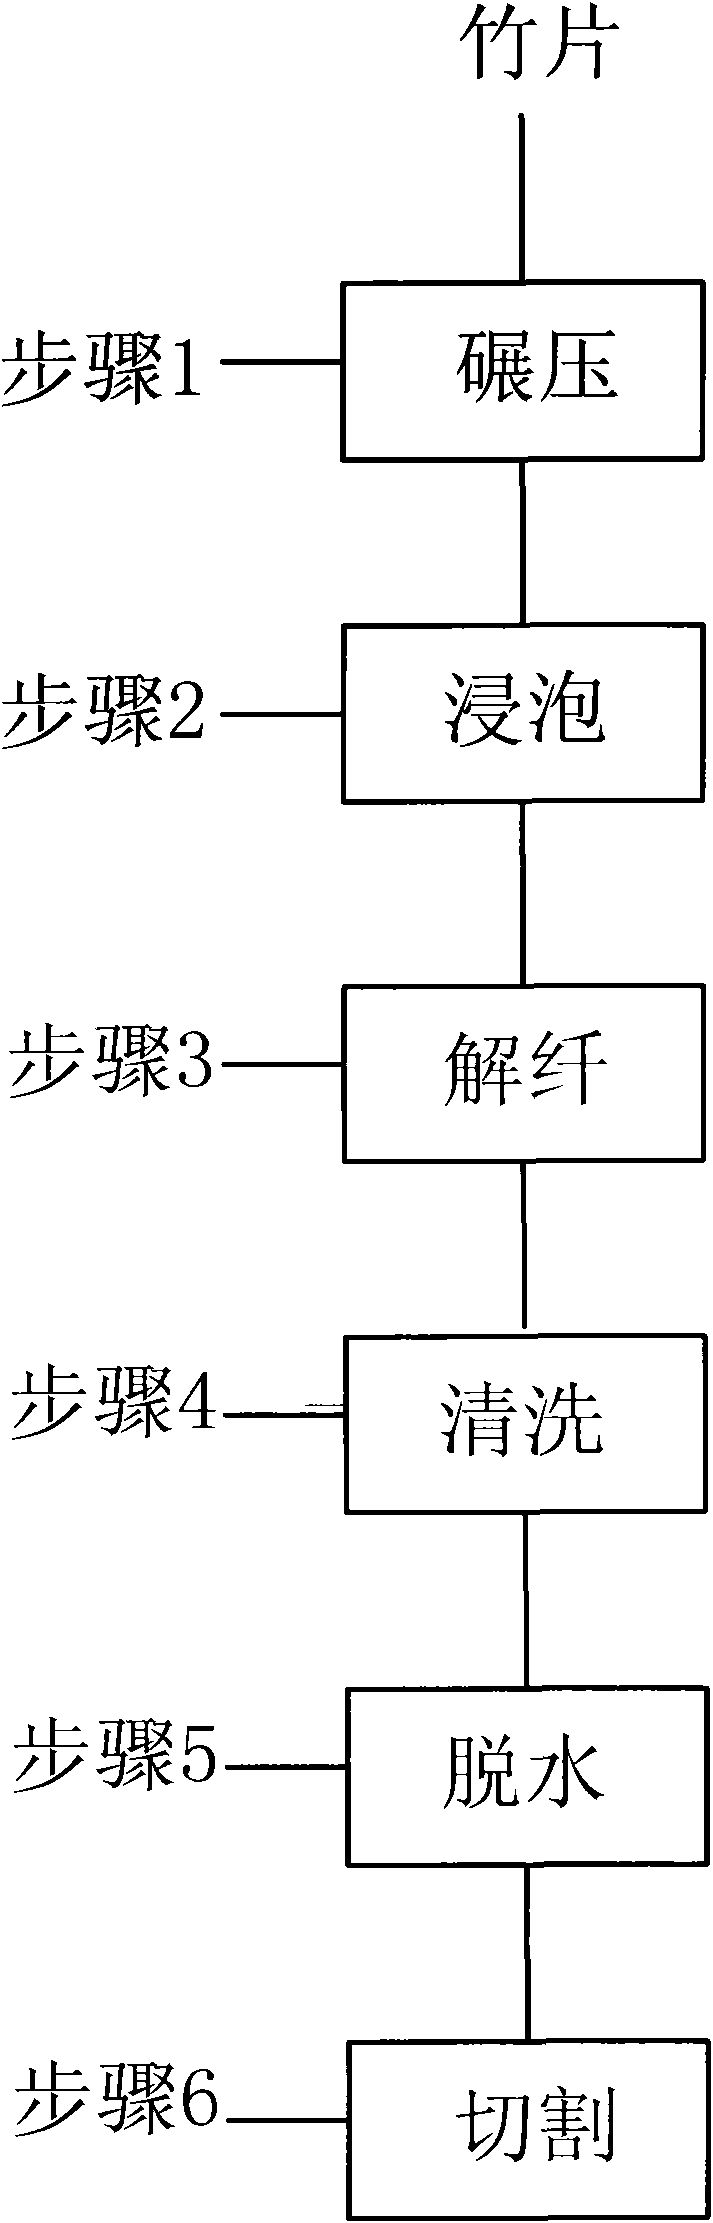 Method for manufacturing bamboo fibers